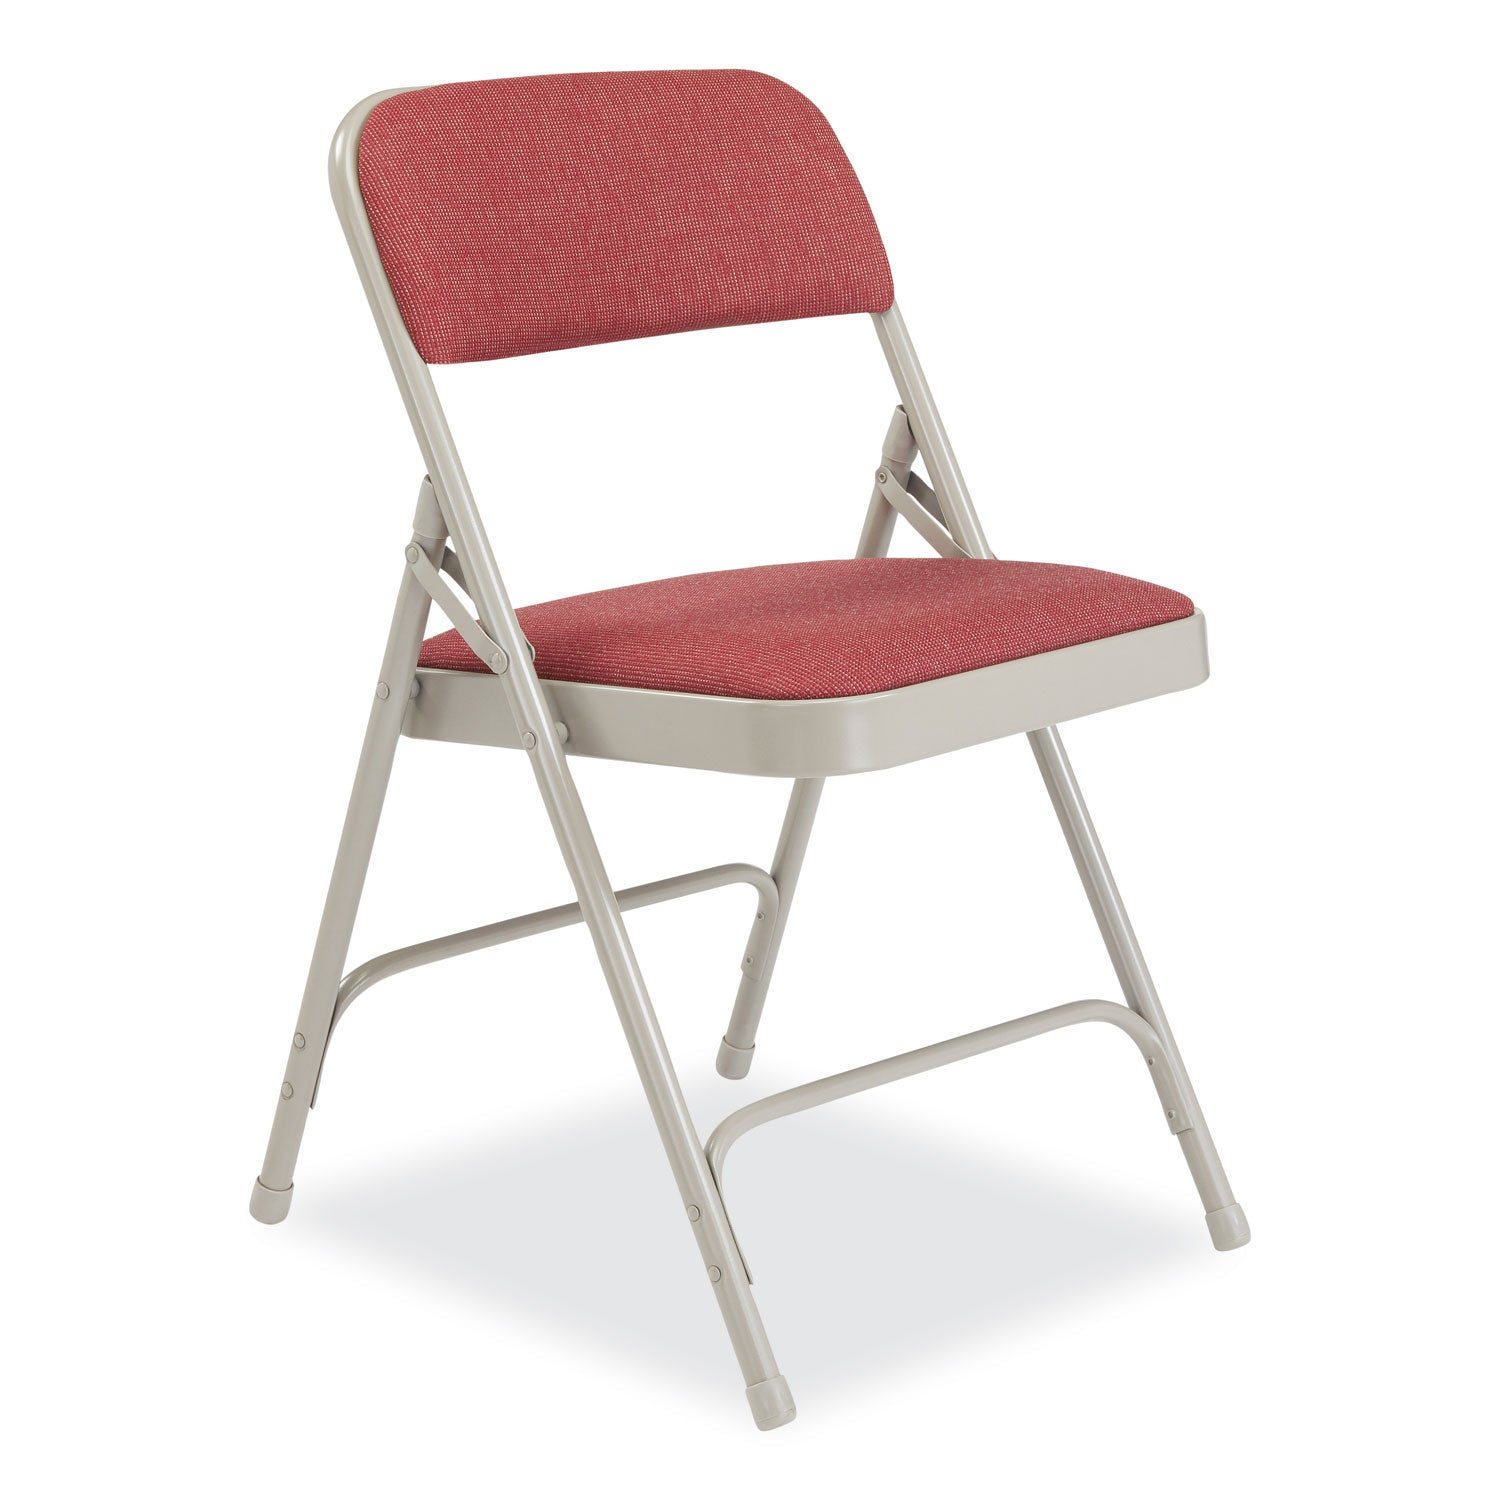 2200-series-fabric-dual-hinge-premium-folding-chair-supports-500lb-cabernet-seat-backgray-base4-ct-ships-in-1-3-bus-days_nps2208 - 2